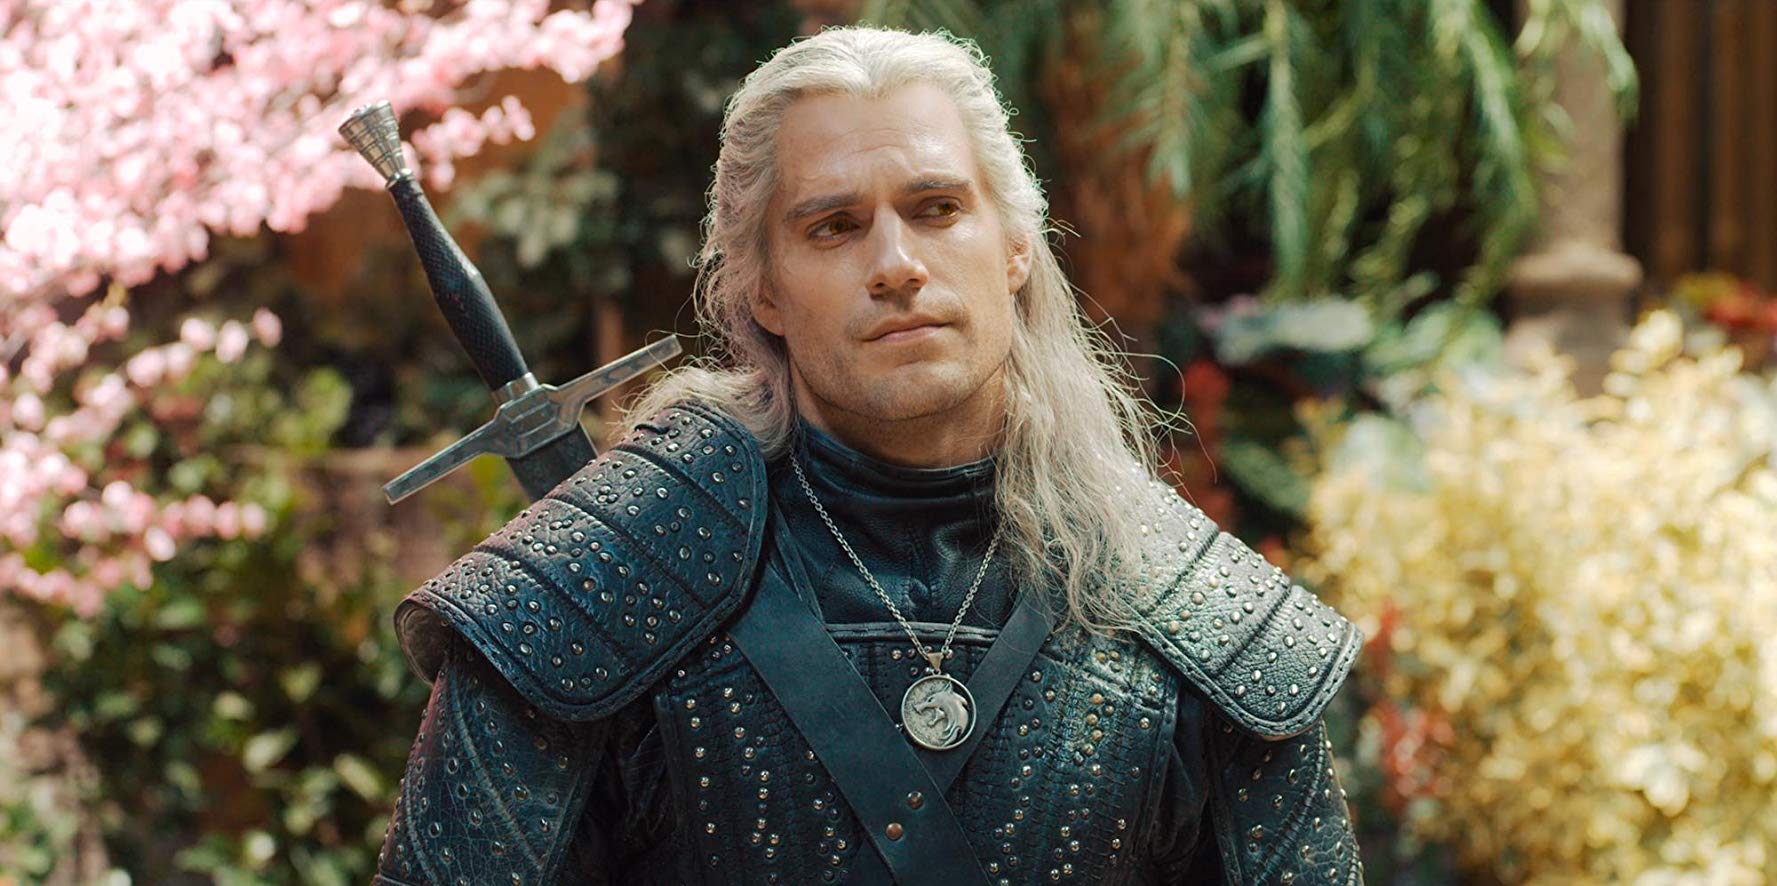 The Witcher becomes one of Netflix's highest rating original series on IMDb